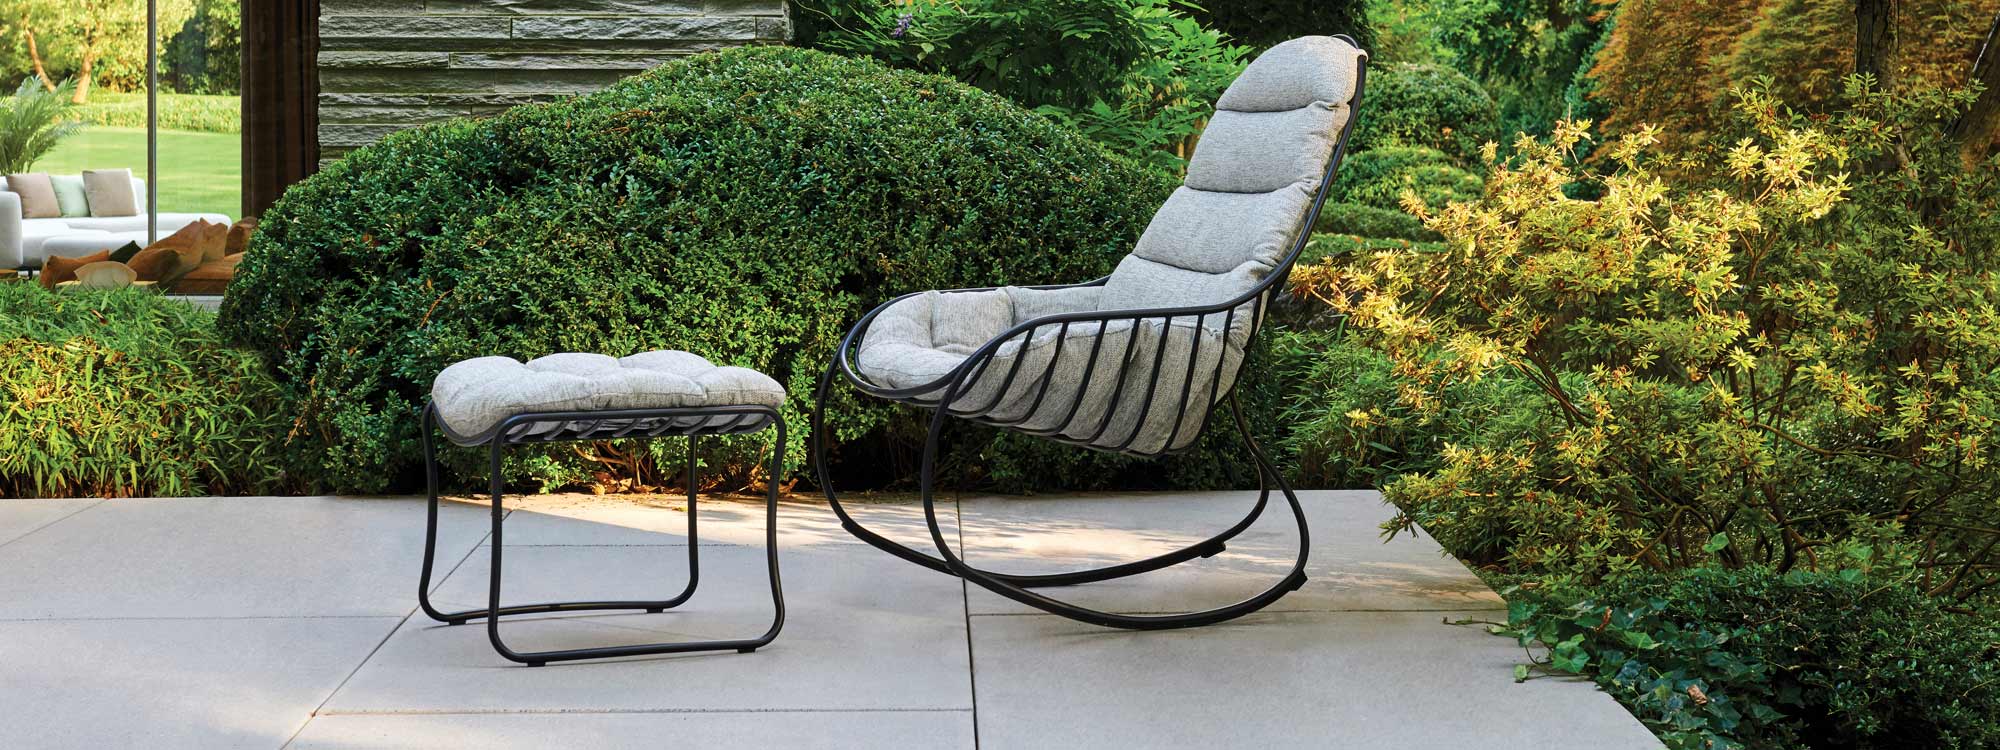 Image of anthracite-coloured Folia outdoor rocking chair and foot stool with grey cushions by Royal Botania